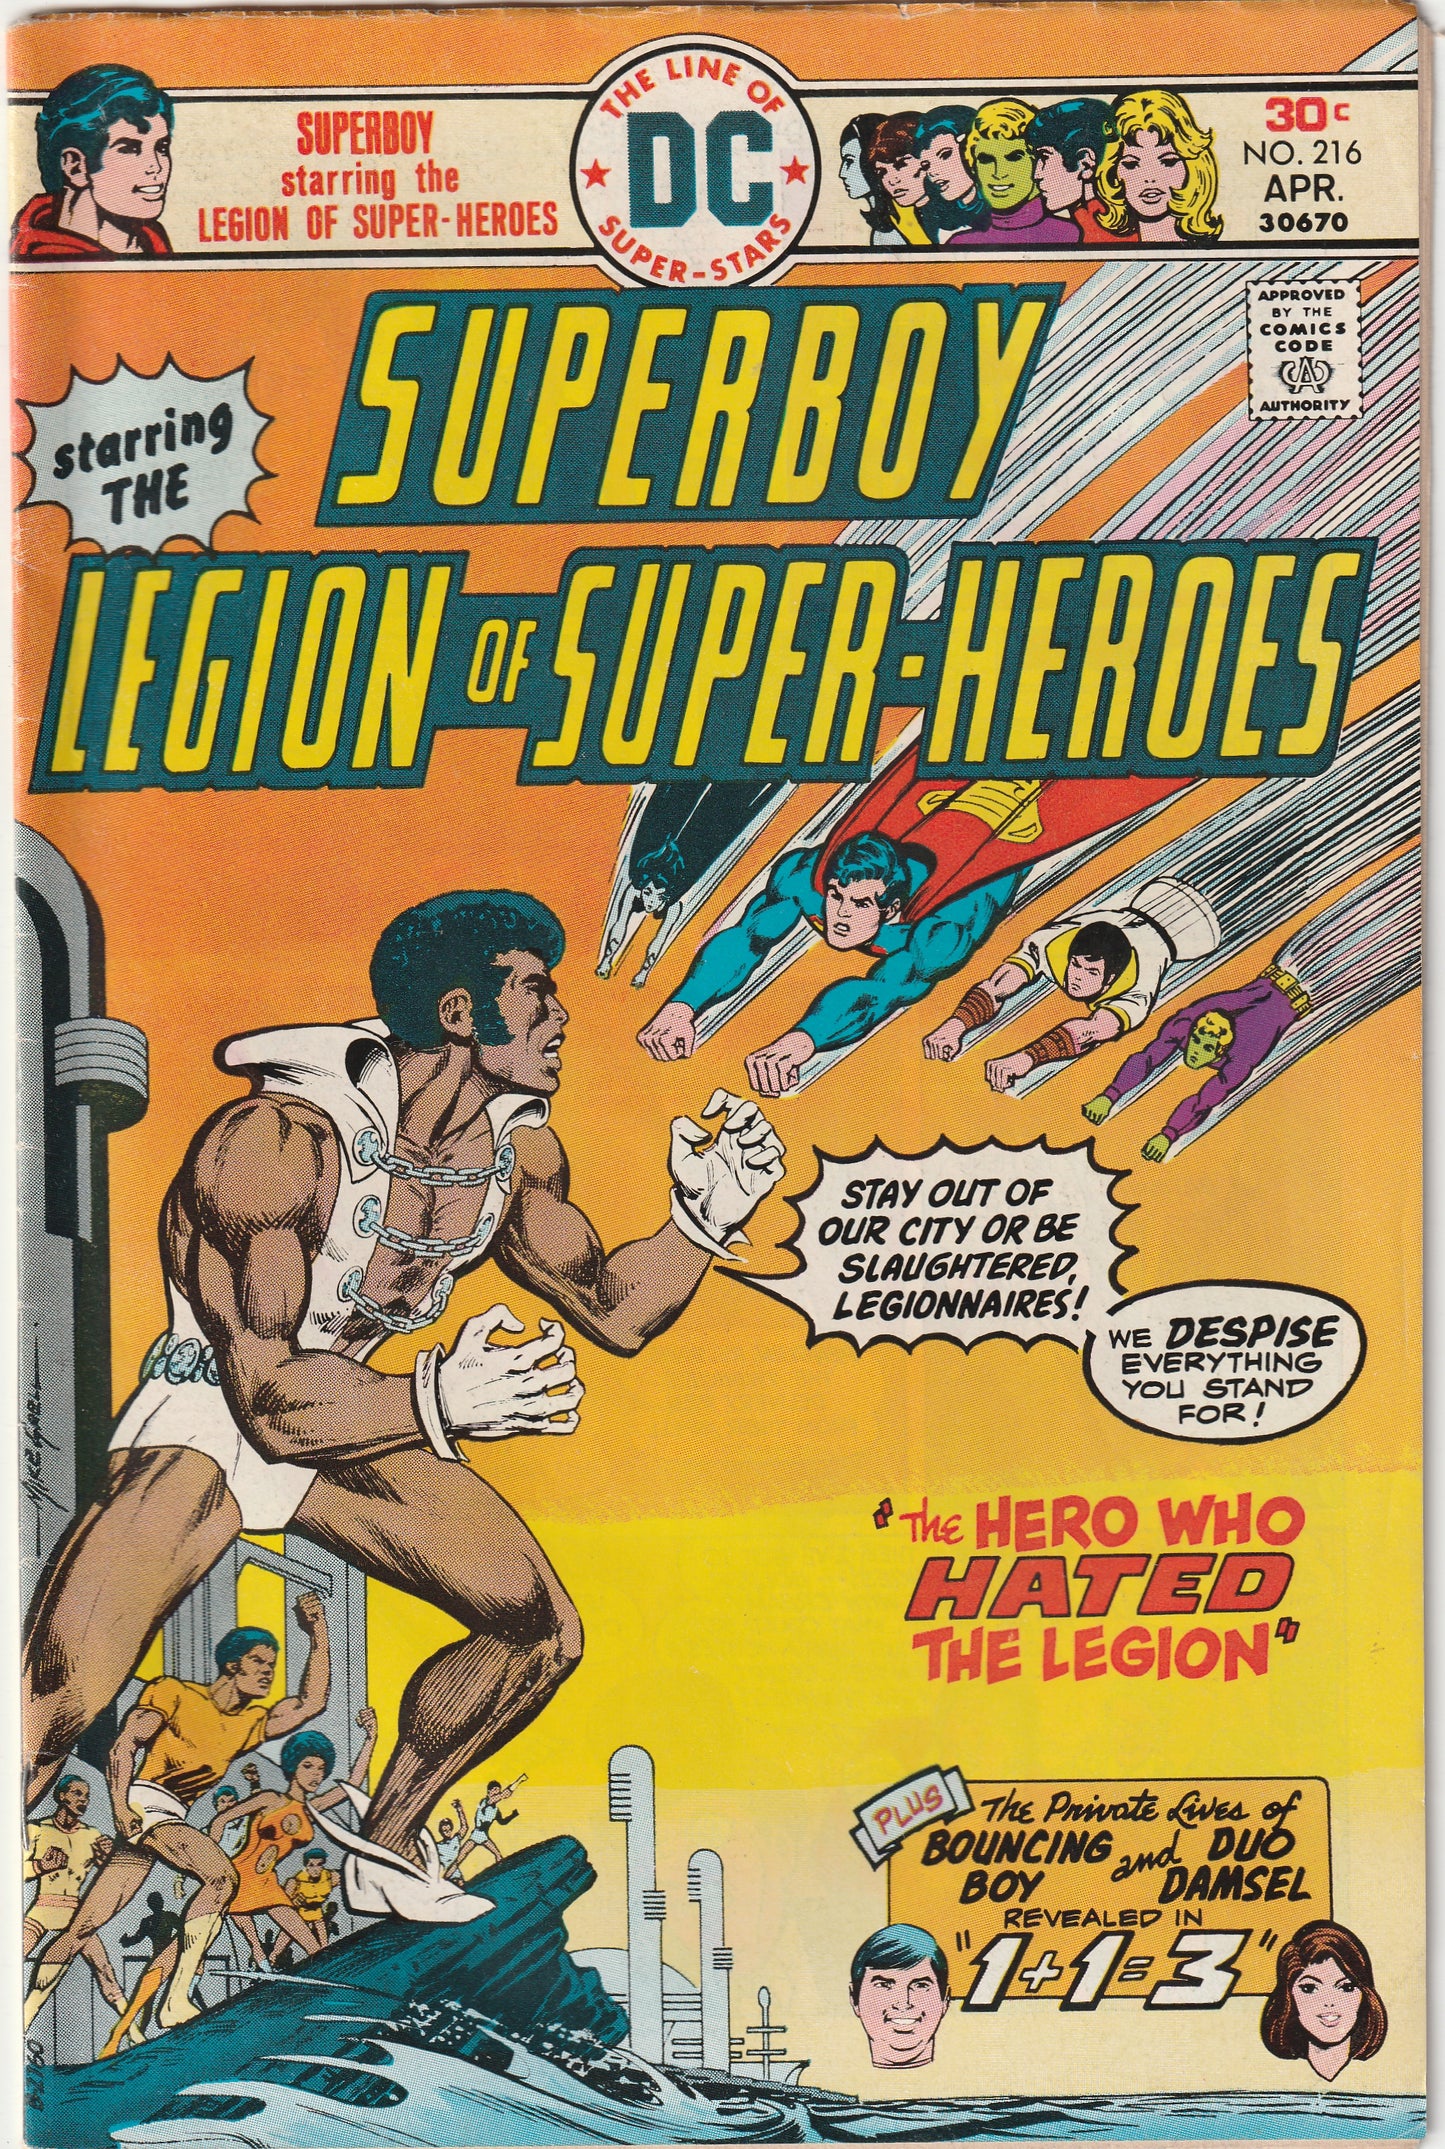 Superboy #216 (1976) - Starring the Legion of Super-Heroes - 1st Appearance Tyroc